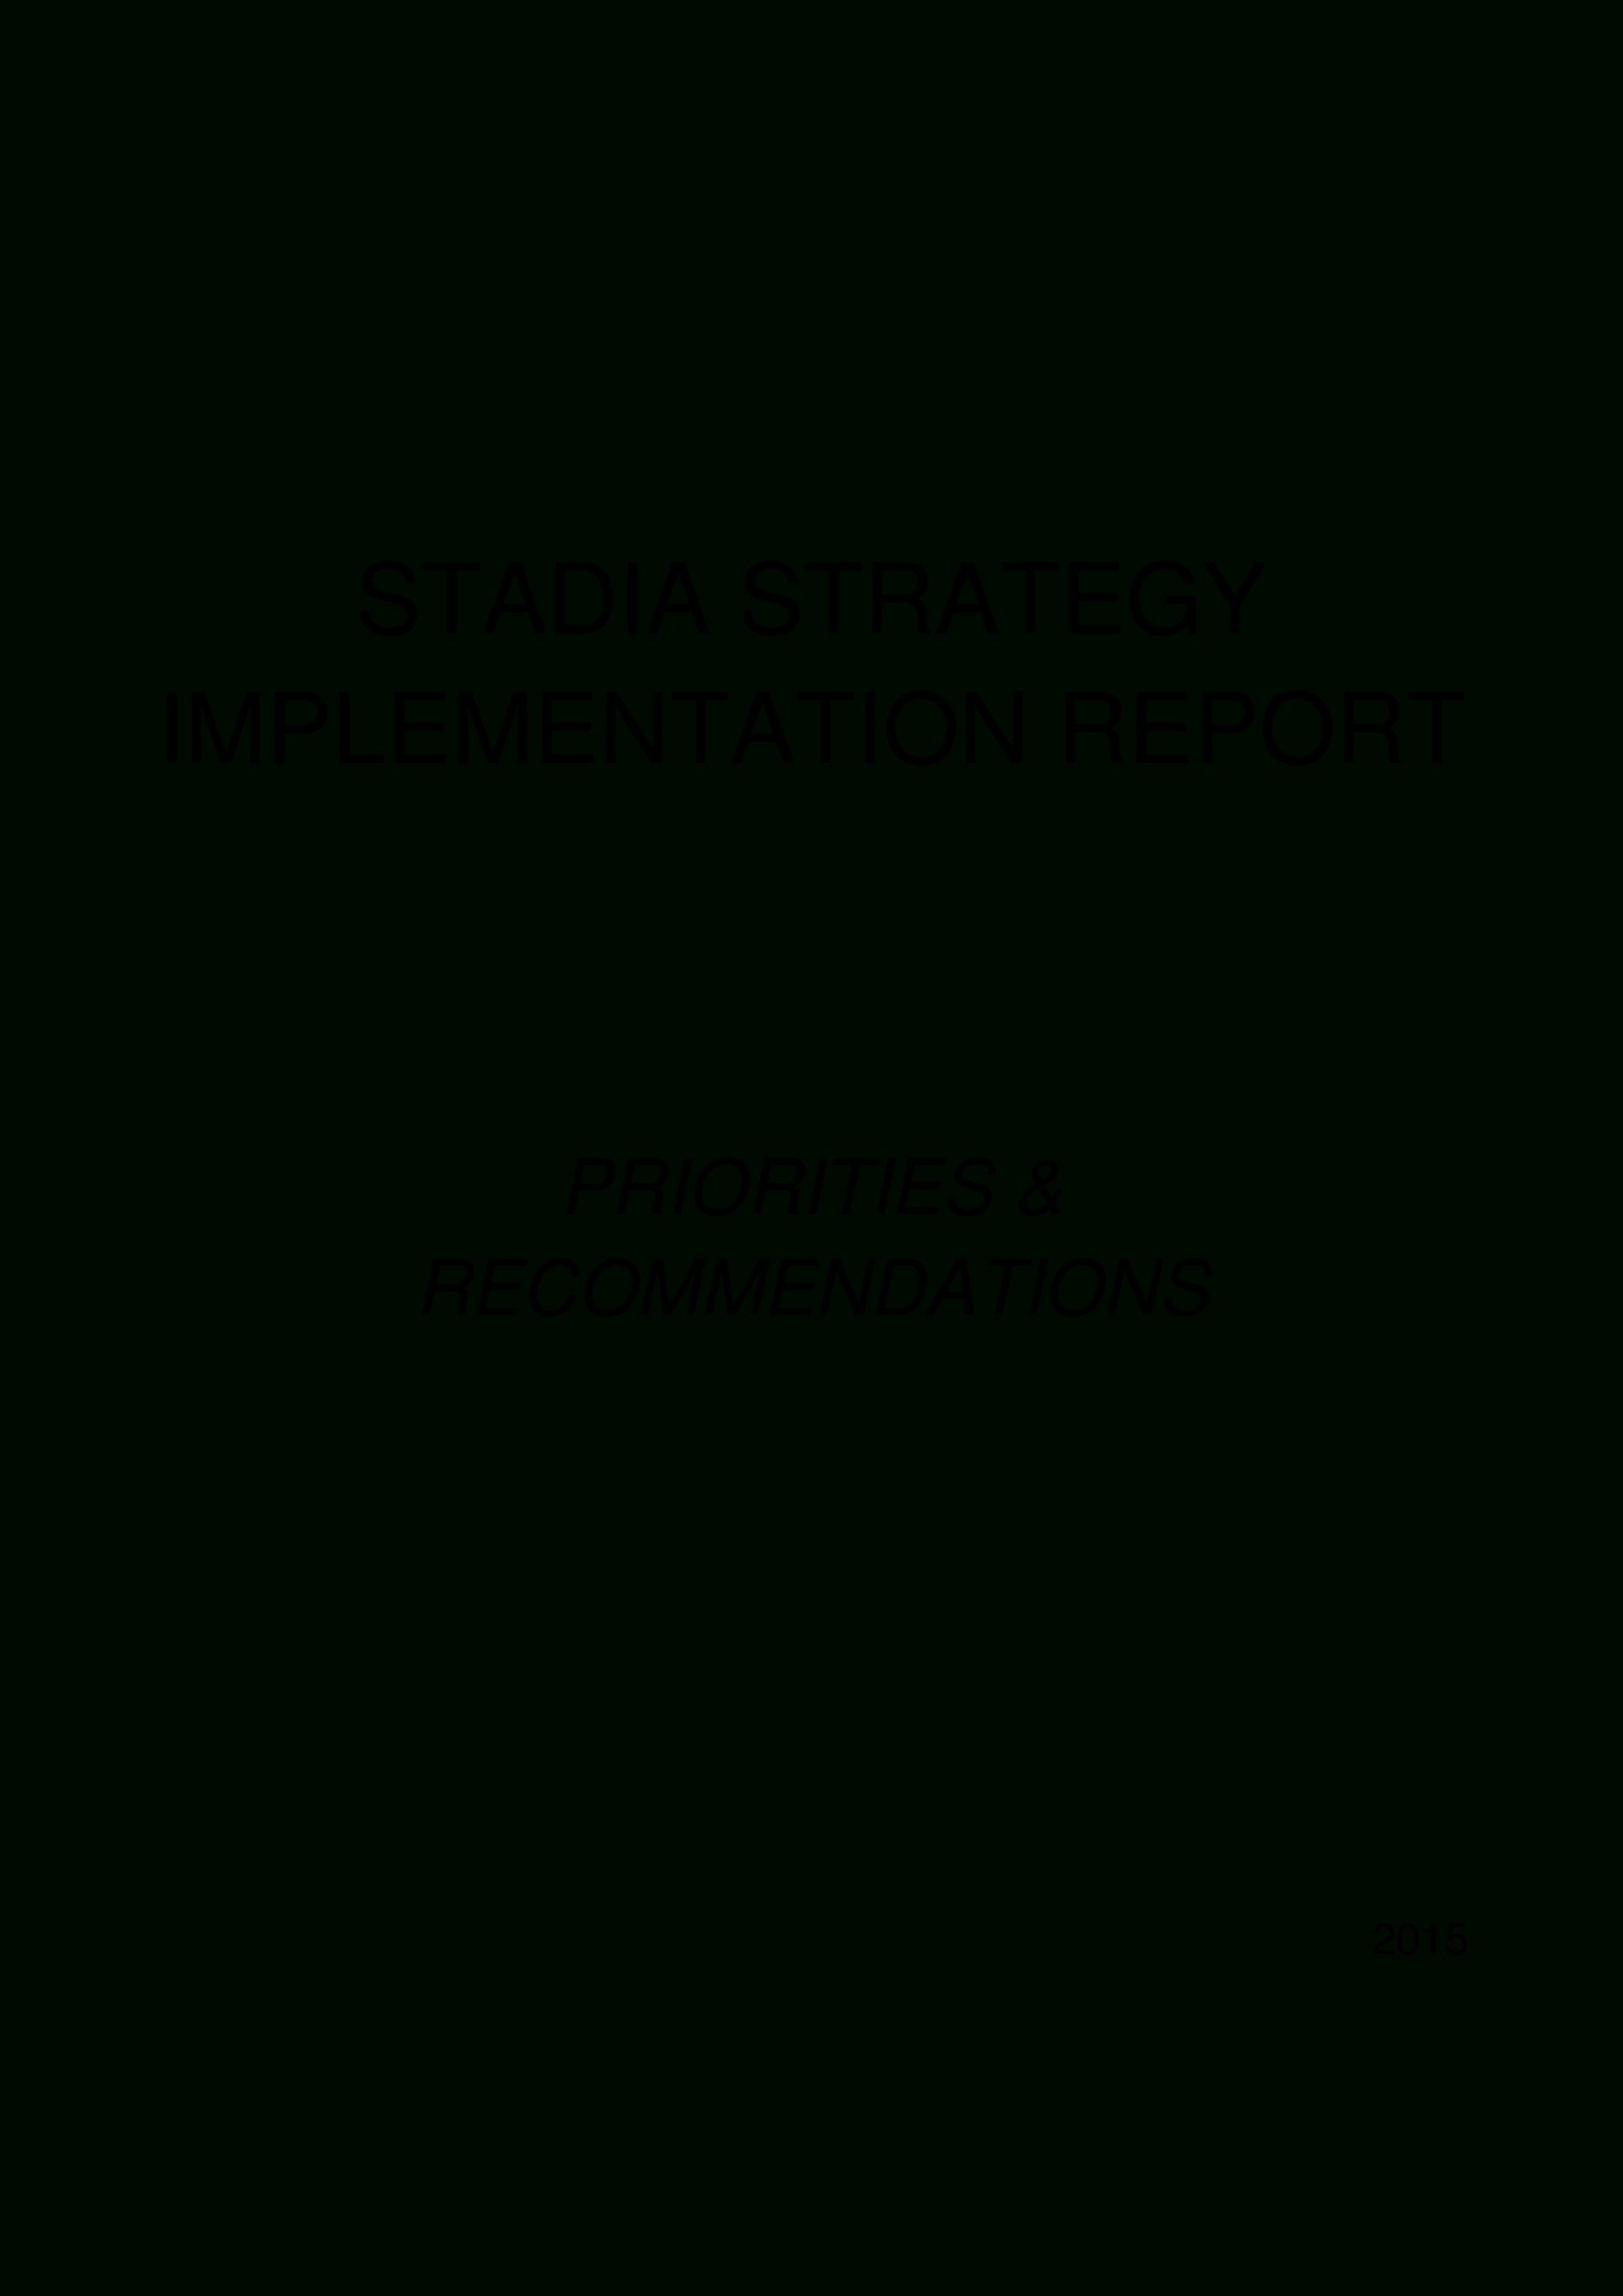 Strategy Implementation Report | Templates At Intended For Implementation Report Template